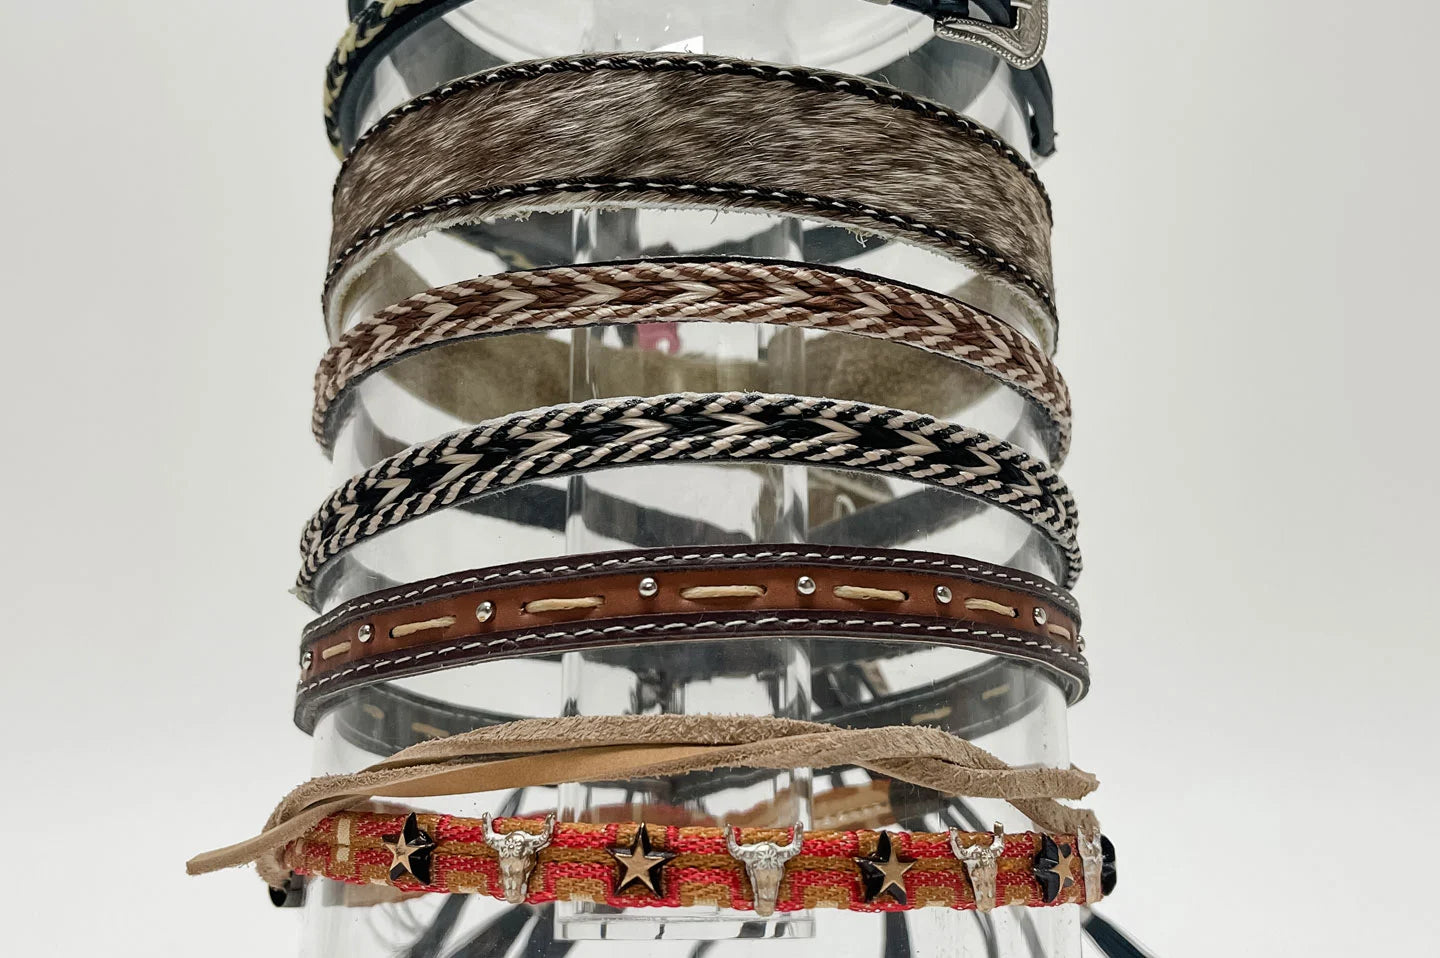 Display of cowboy hat bands by American Hat Makers